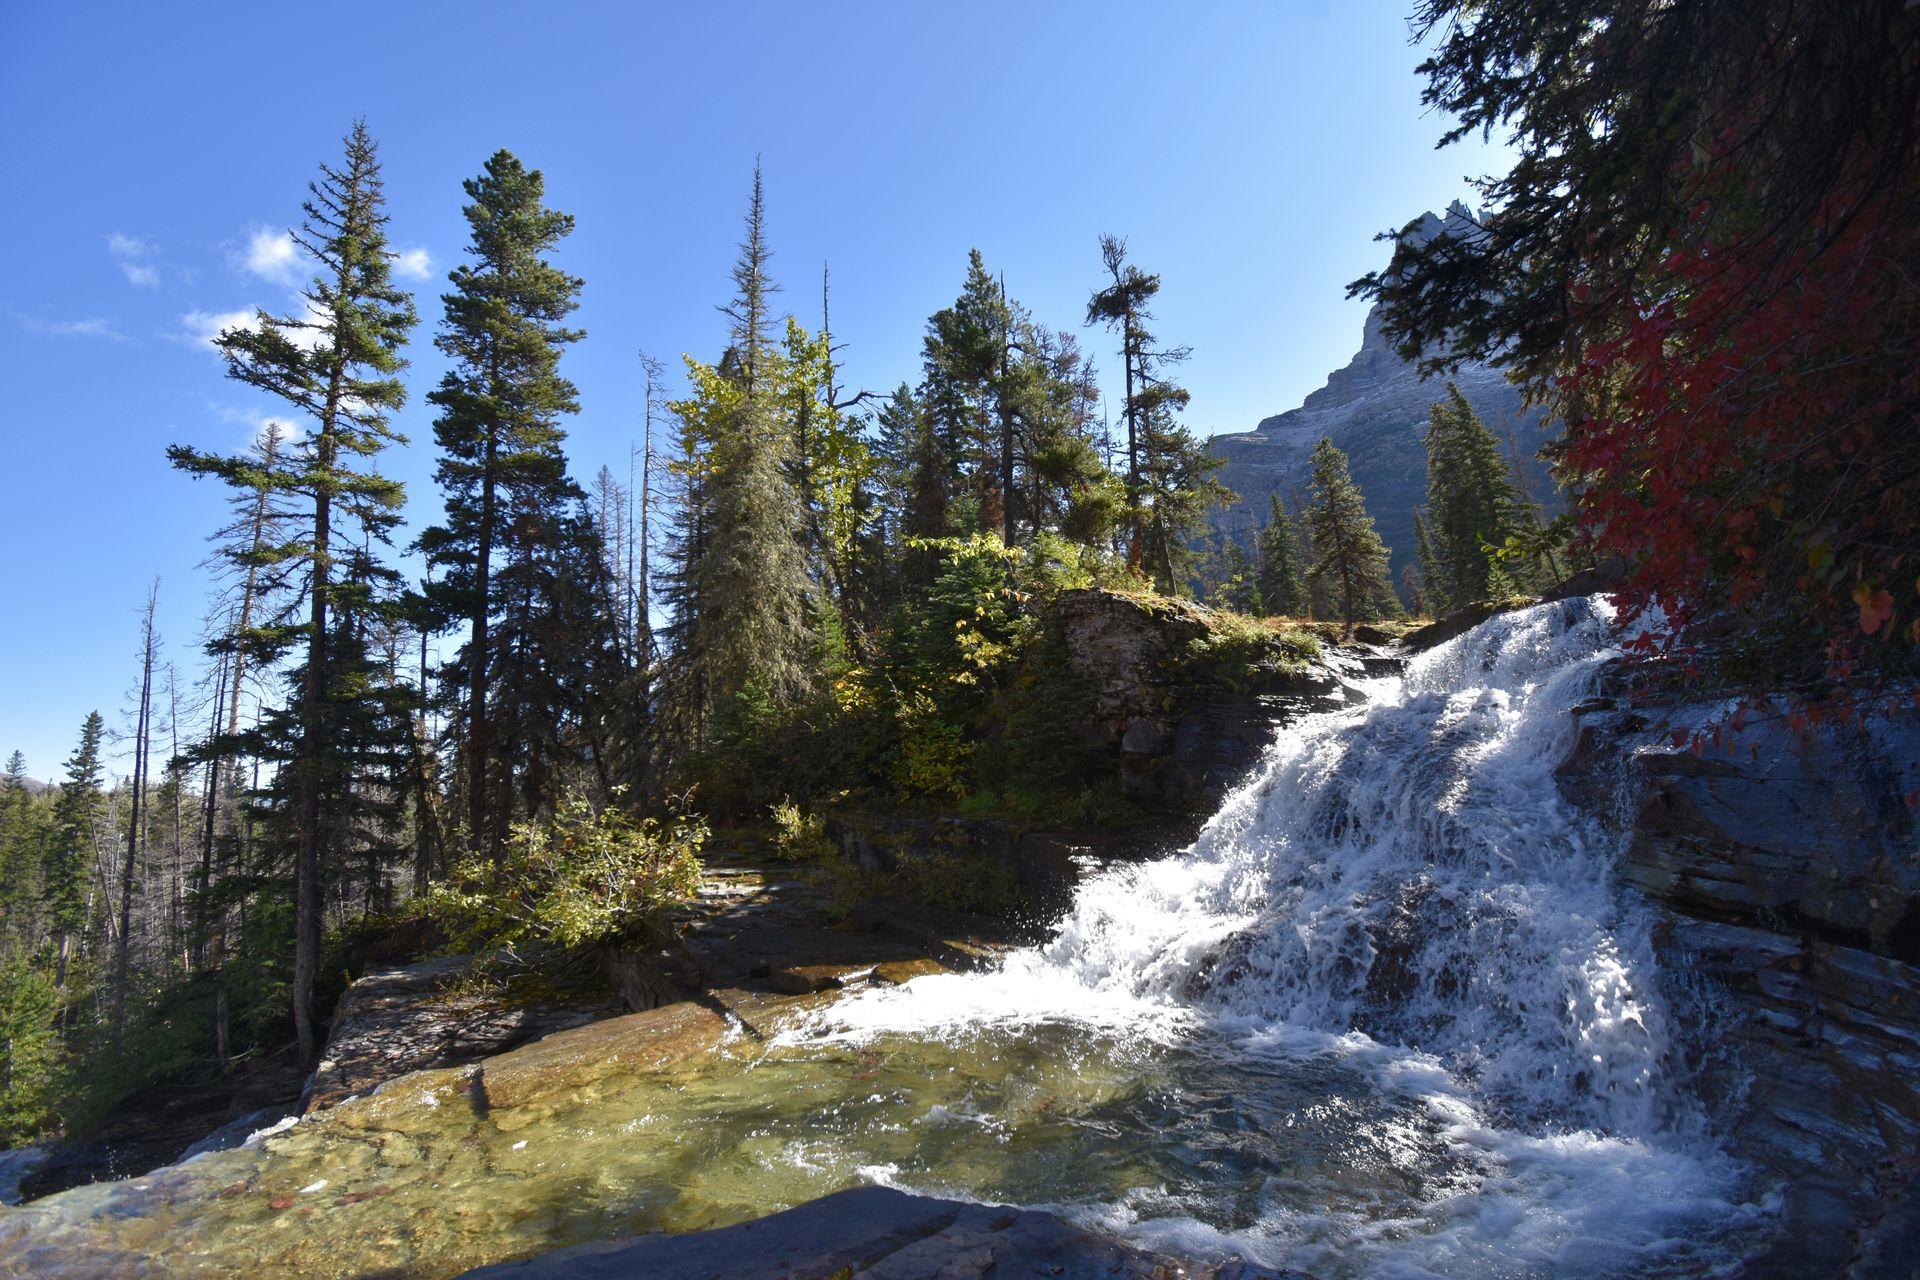 A small waterfall with pine trees in the background.